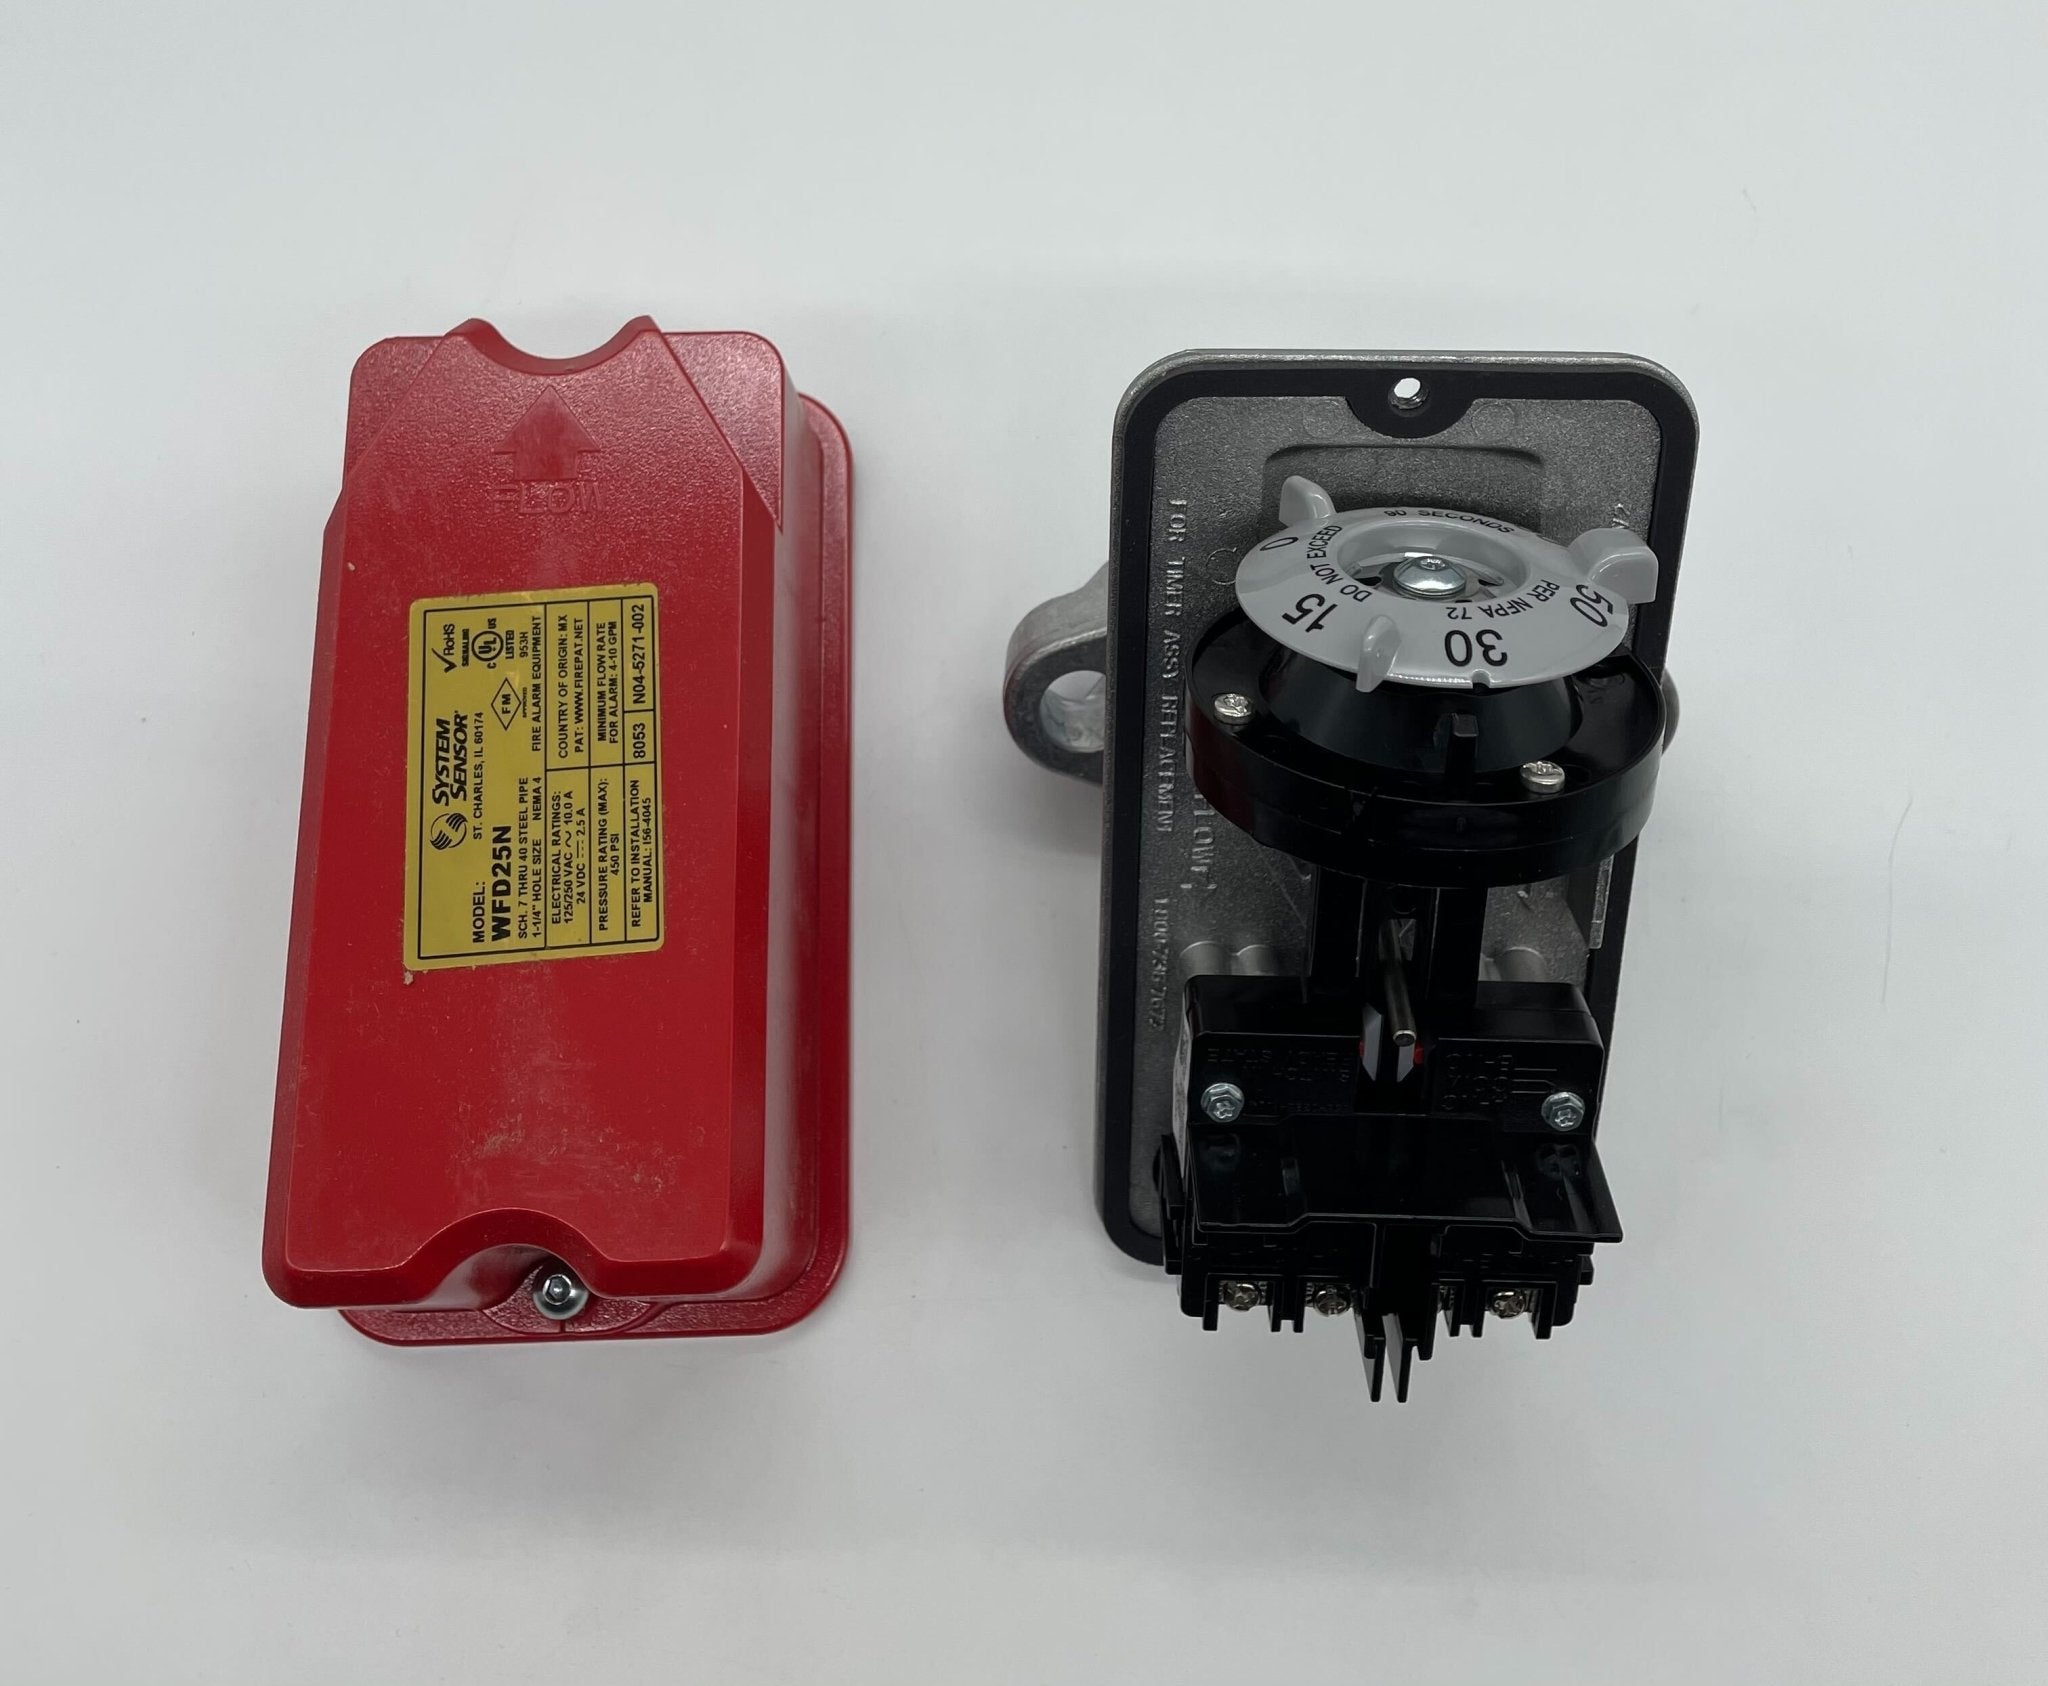 System Sensor WFD25N Waterflow Detector - The Fire Alarm Supplier